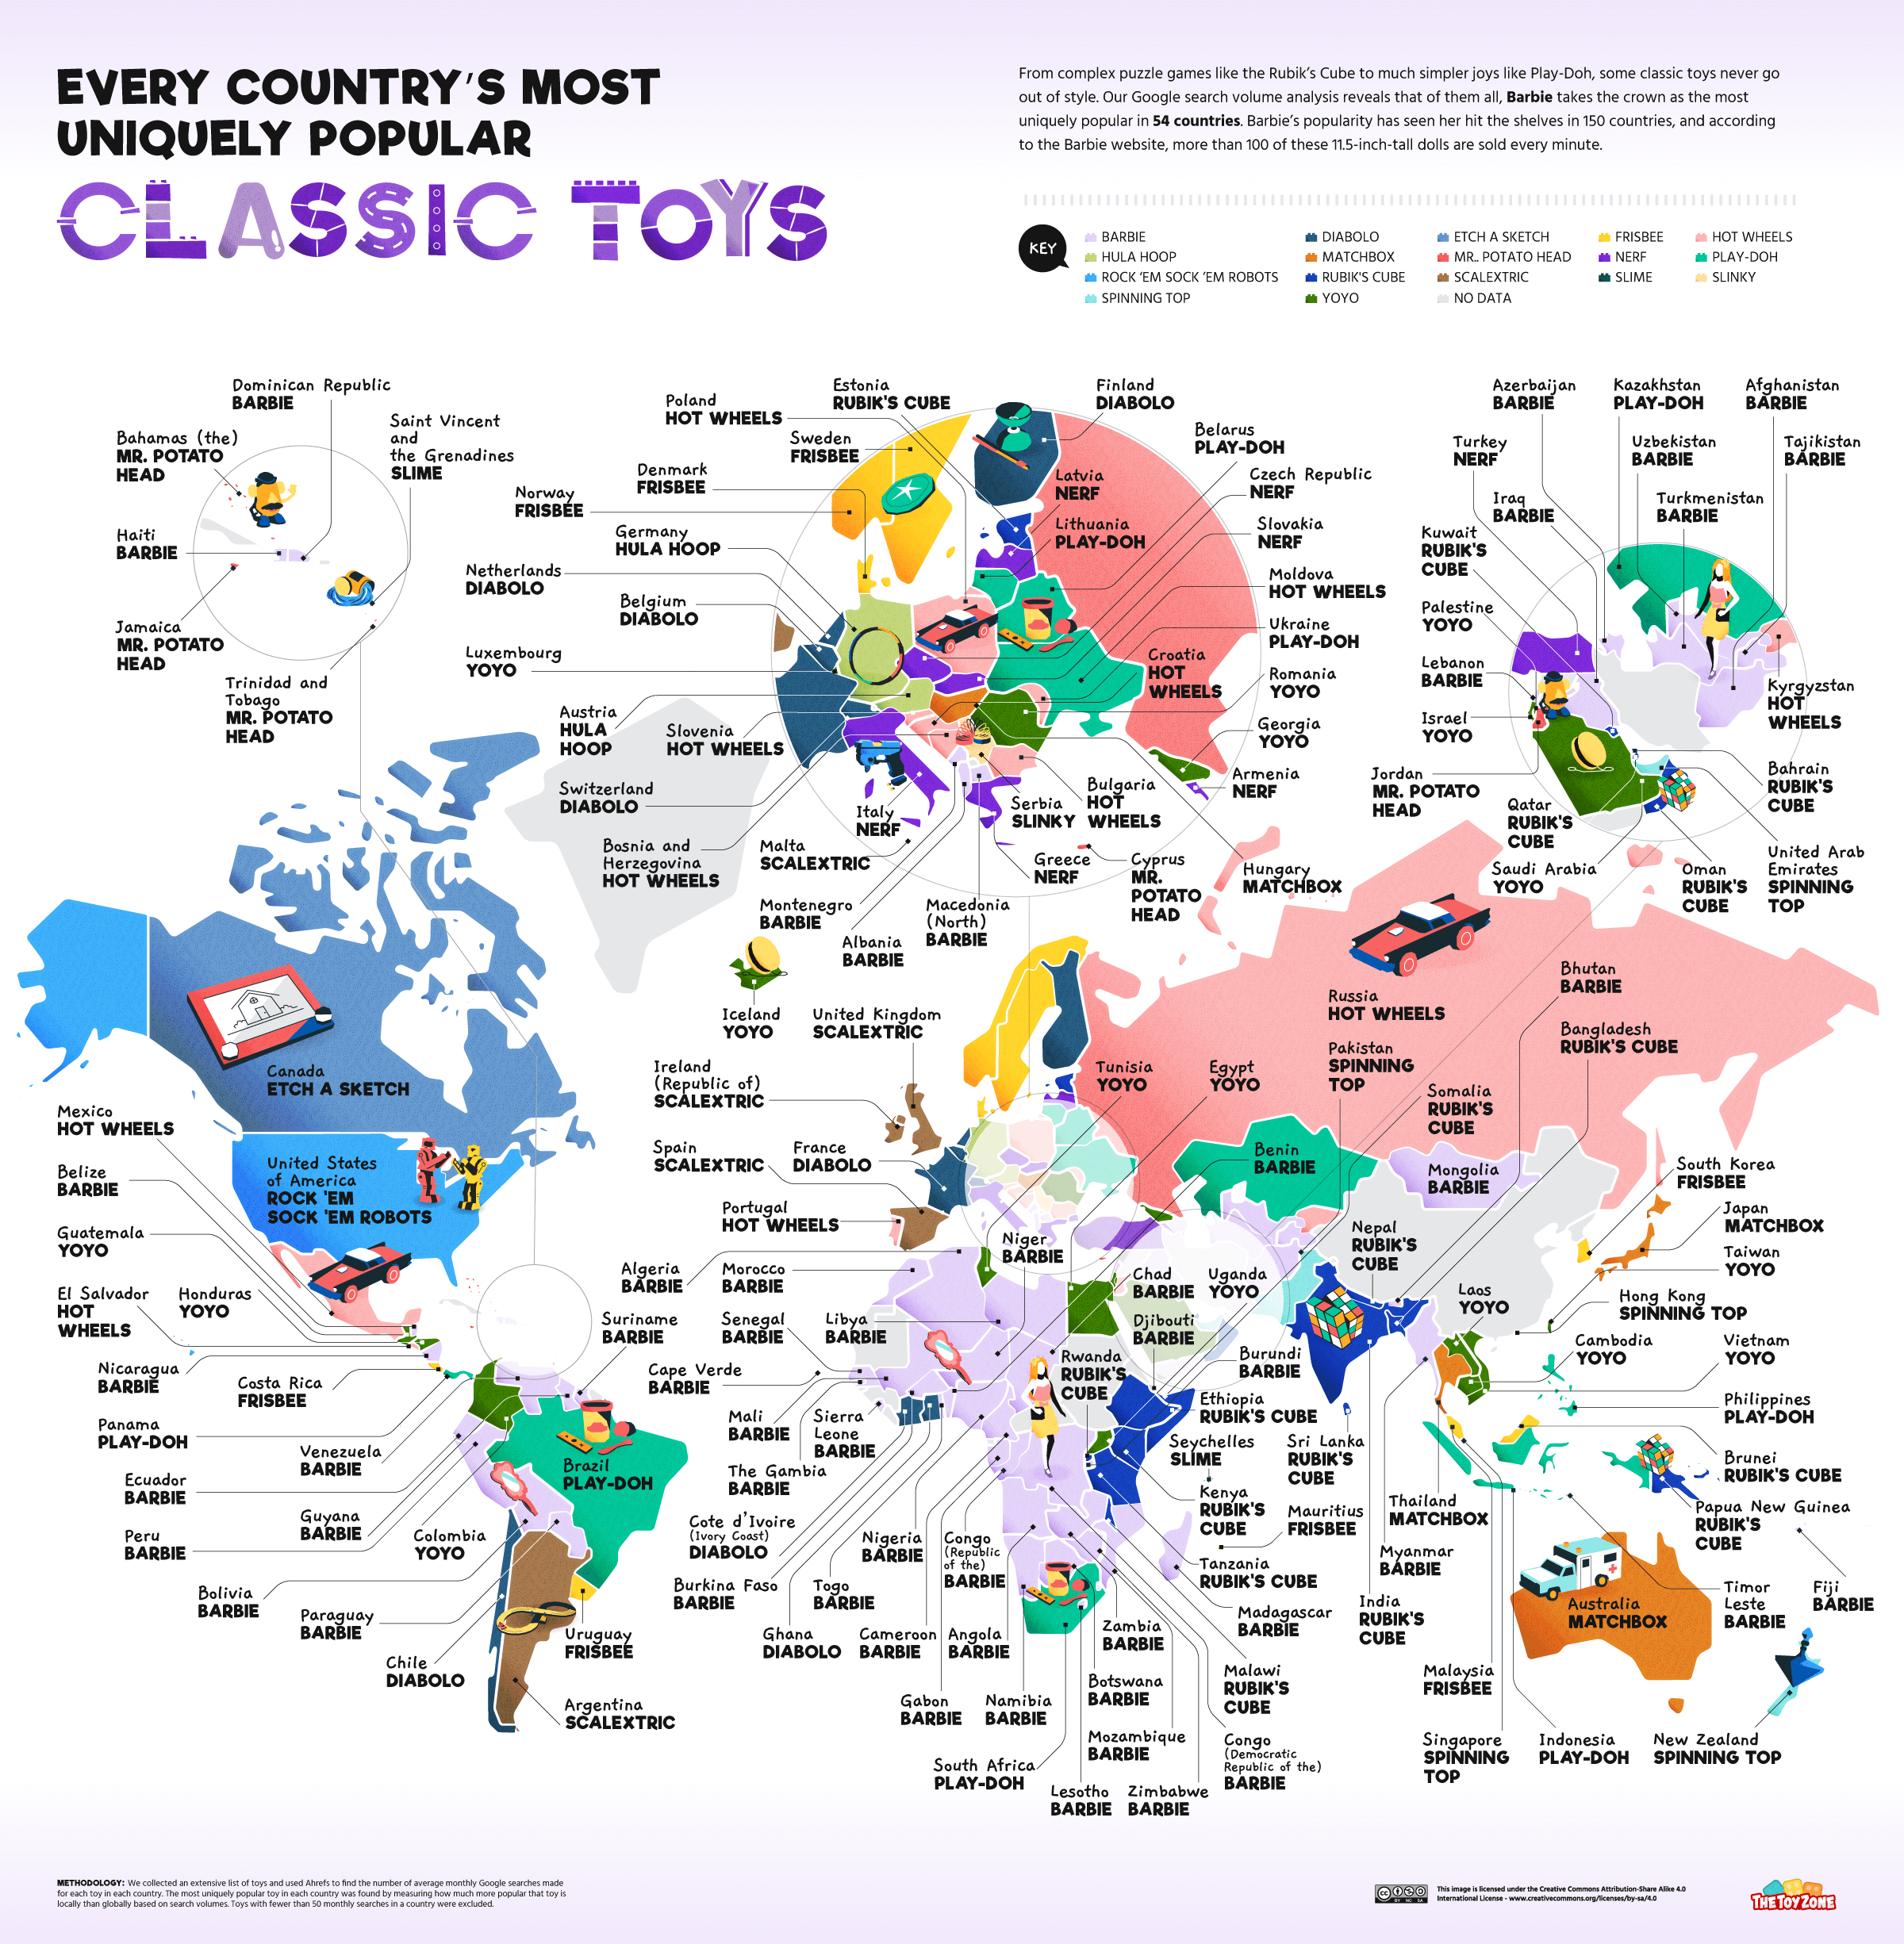 The most popular classic toys by country